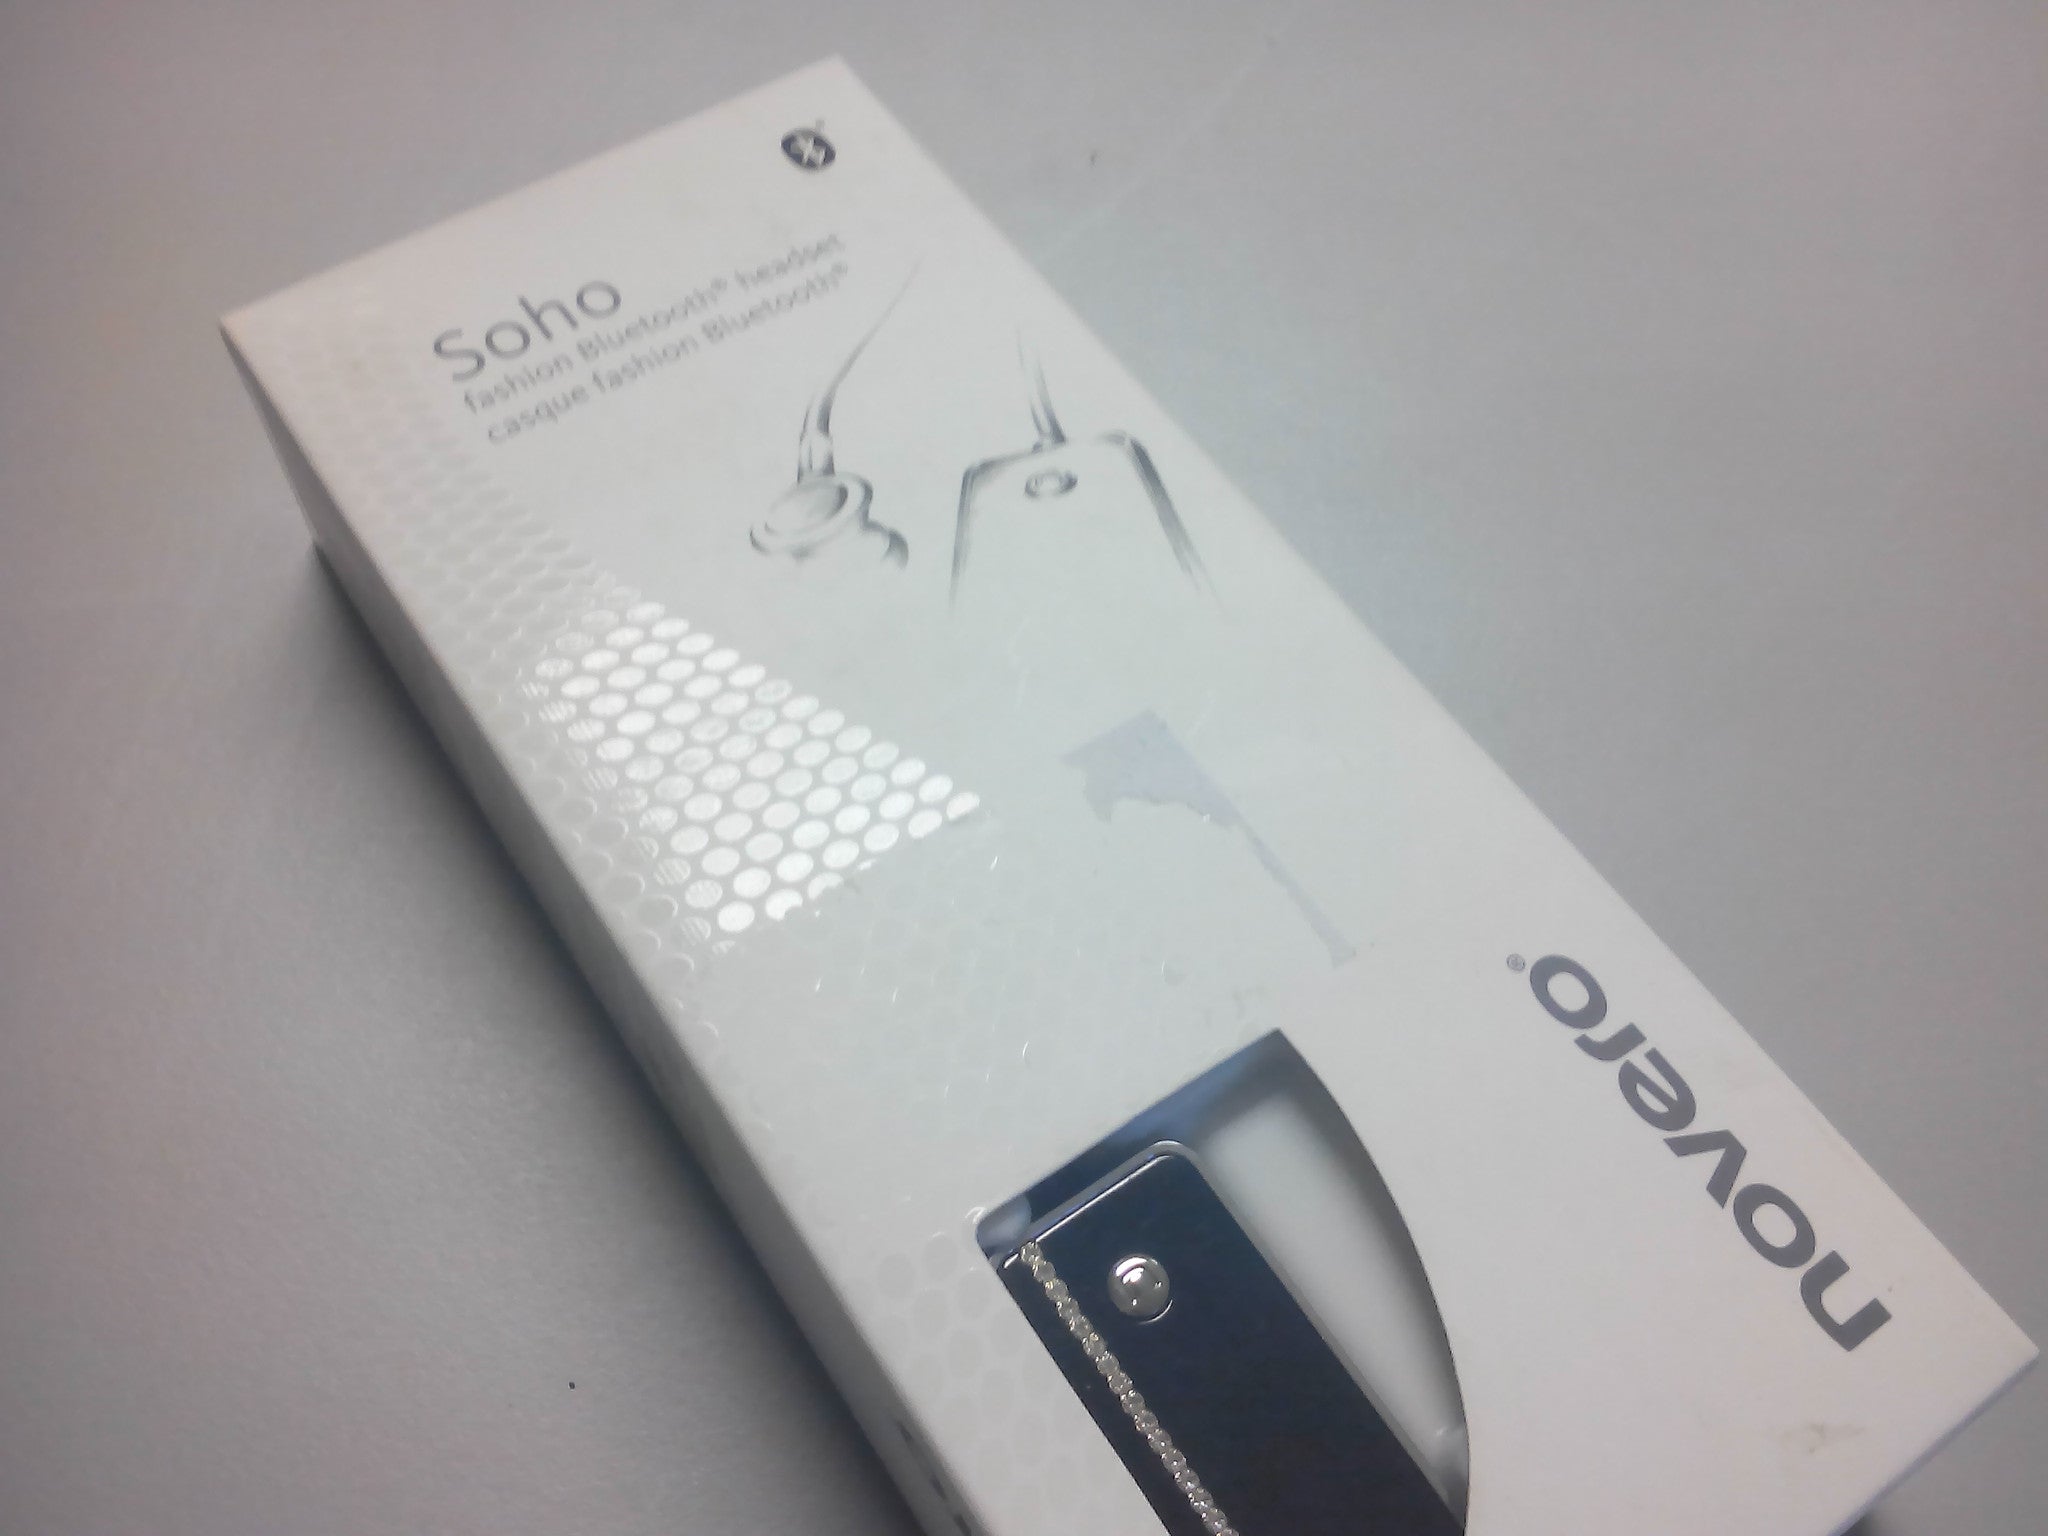 Novero Soho Crystal Arc Bluetooth Headset - Black / White - PC User | PC Parts And Spares | FREE UK DELIVERY